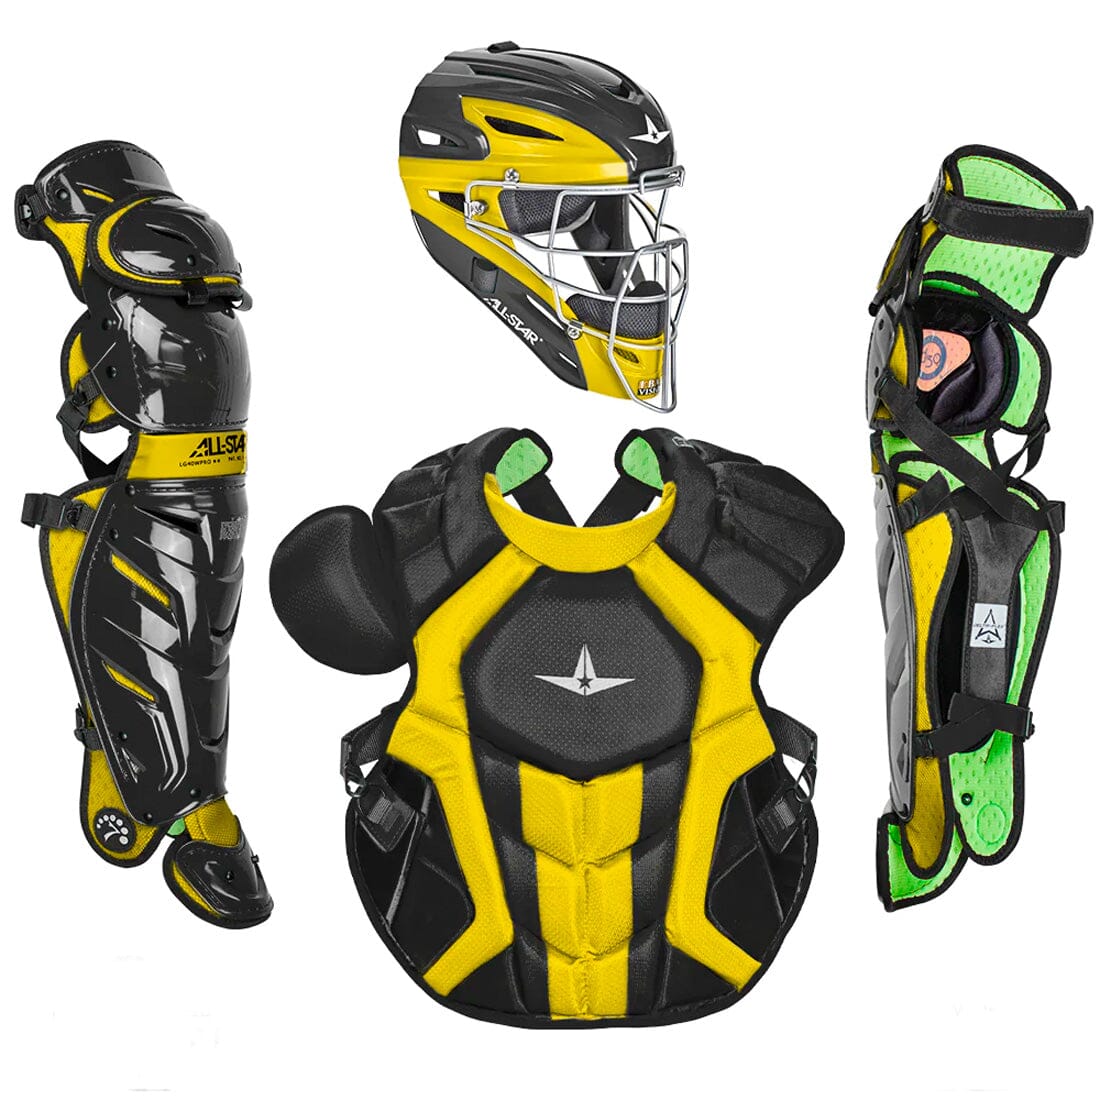 All-Star S7 AXIS (Adult) Two Tone Catcher's Kit NOCSAE APPROVED:  CKCCPRO1X-TT